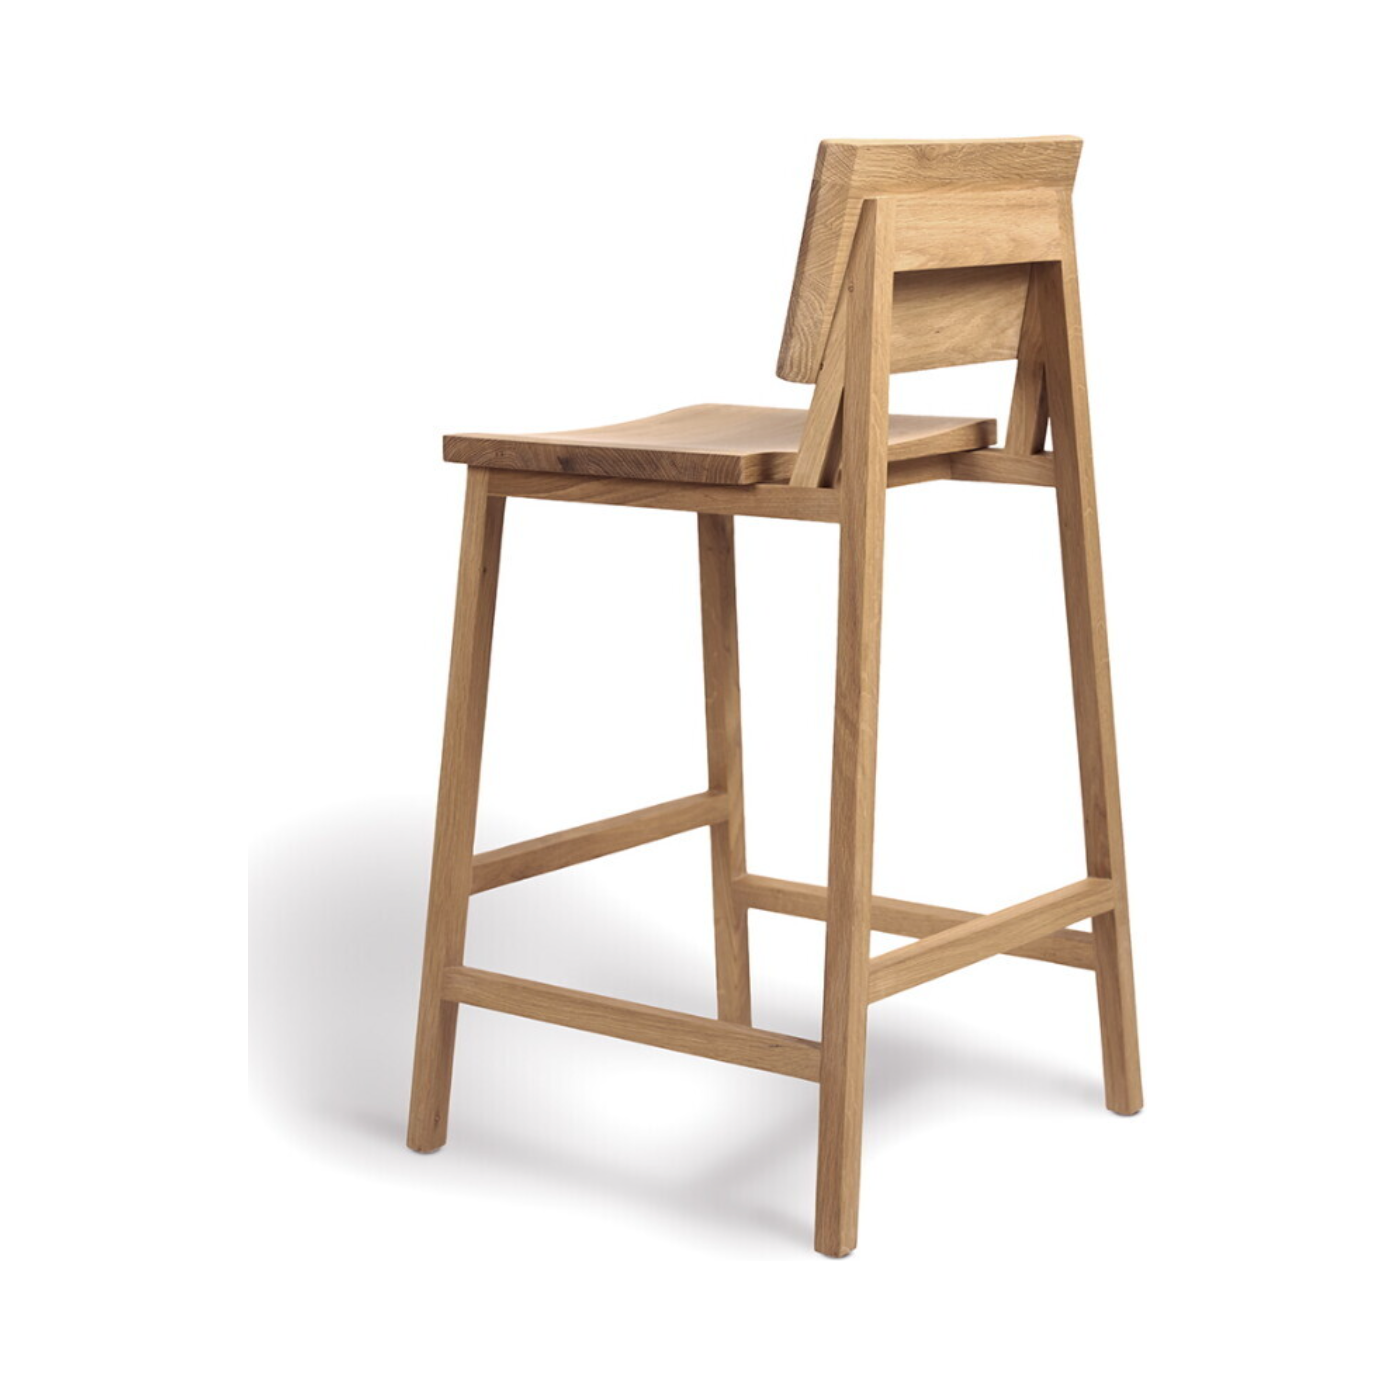 We love the versatility of this Oak N3 counter stool. Designed by Nathan Yong, this stool is a timeless piece that adds both modern lines and a cozy organic aesthetic to your bar area or kitchen island.  Dimensions: 19.5"w x 20"d x 36"h Seat Height: 26"  Material: Oak, 100% Solid Wood Finish: Oiled 